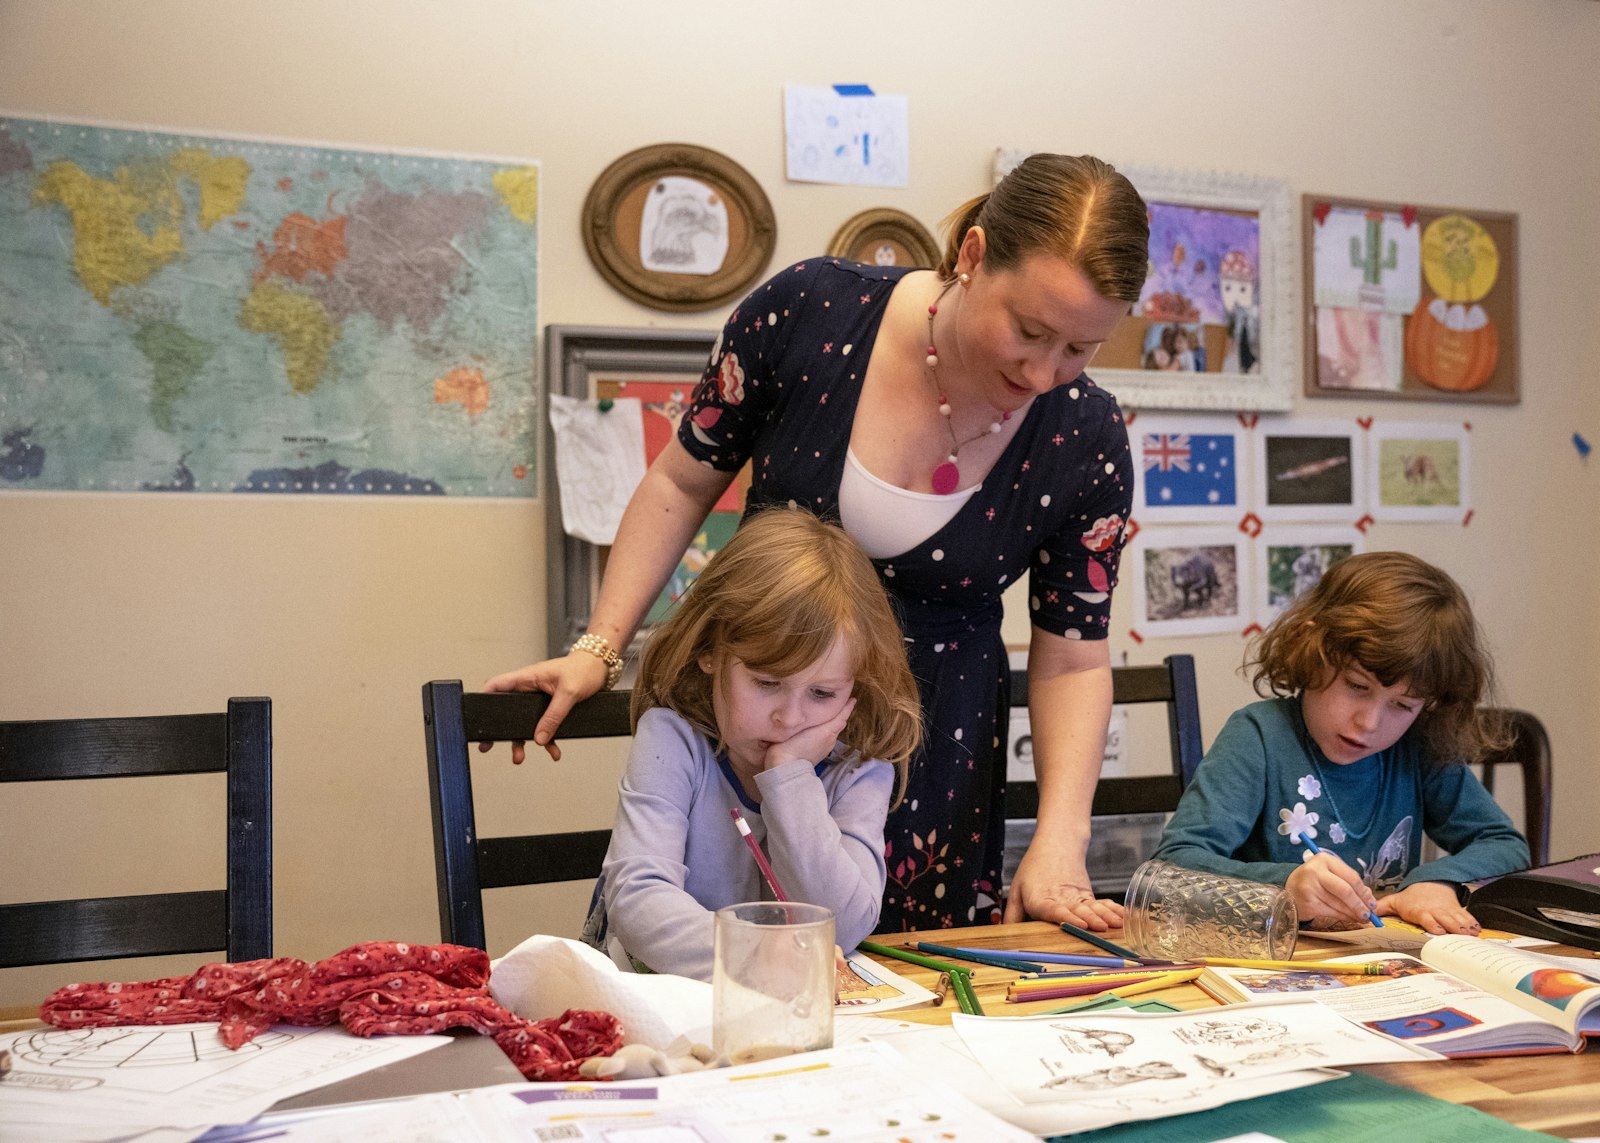 Pressprich relies on her Montessori training to write her books and teach her children, with a focus on their dignity and ability to comprehend more than adults often give them credit for.